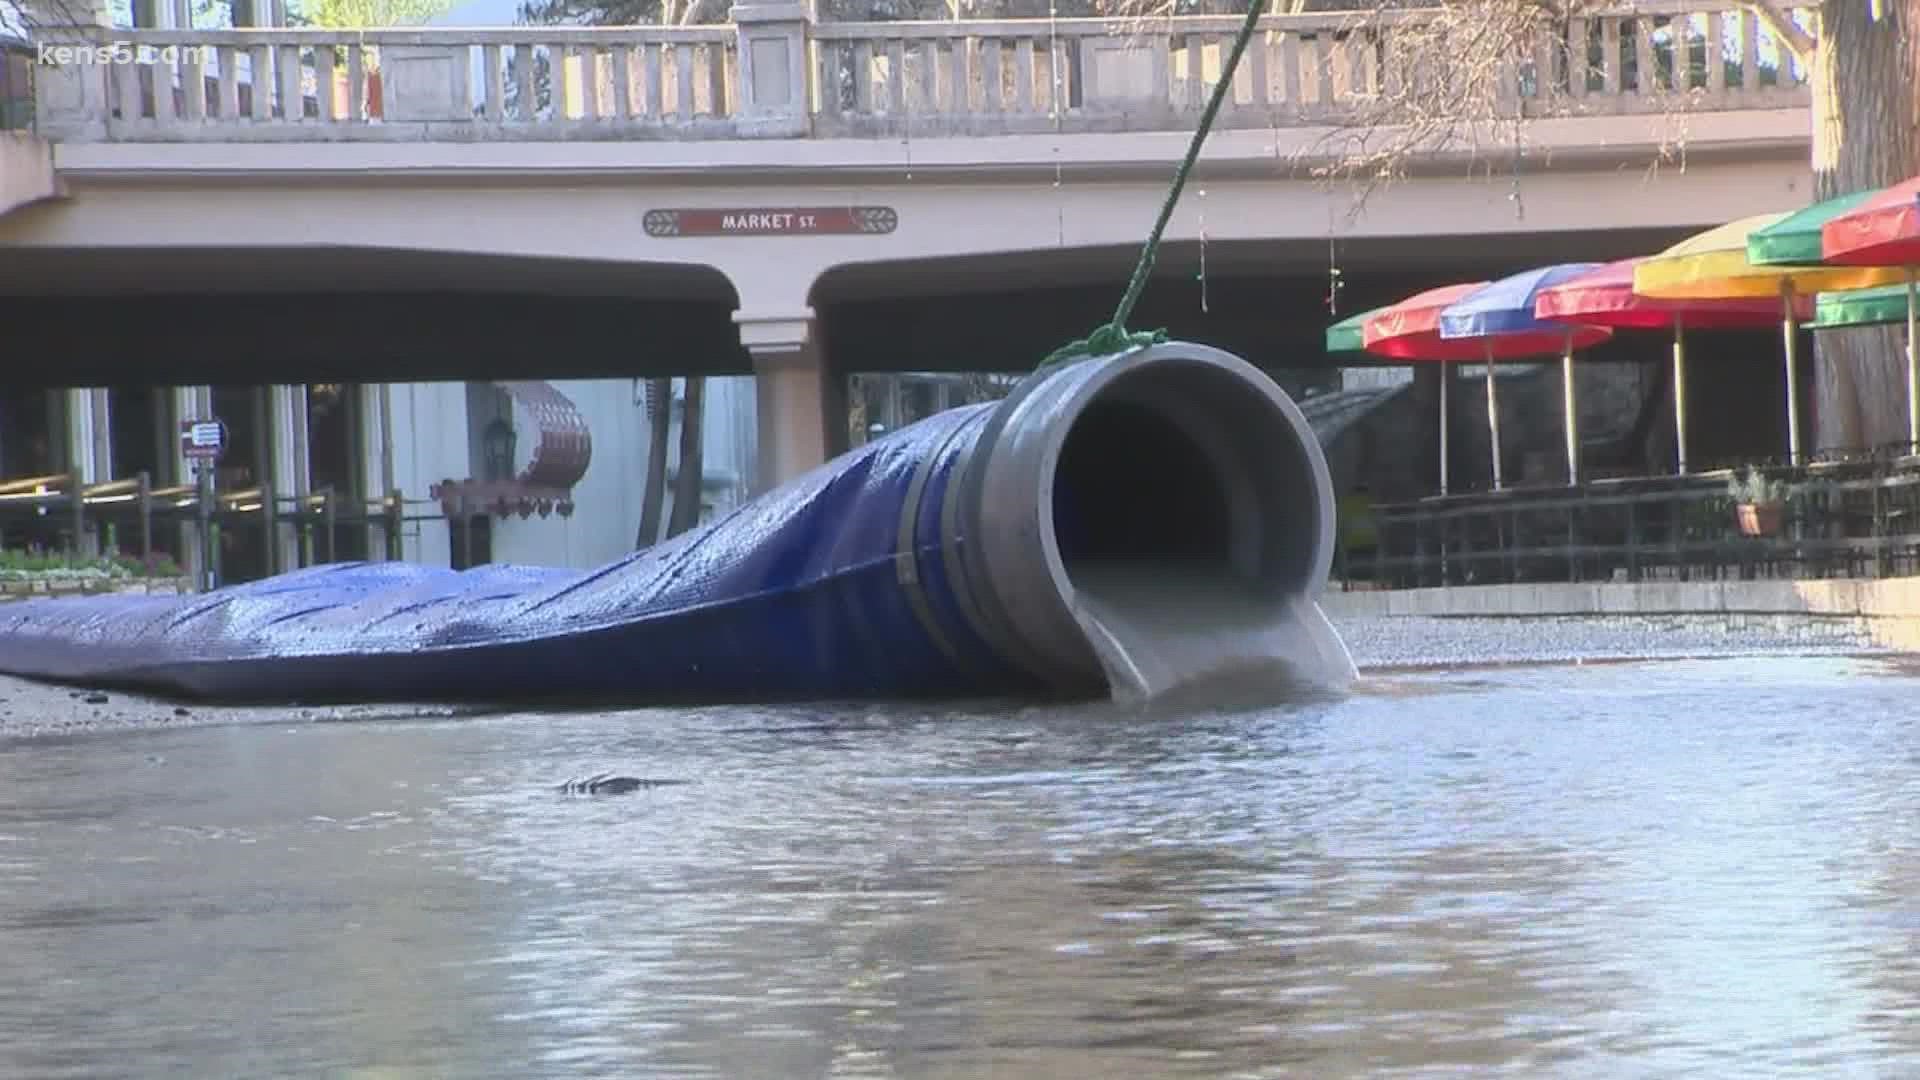 The city and the San Antonio River Authority hope to have the river filled by Sunday if the weather permits.